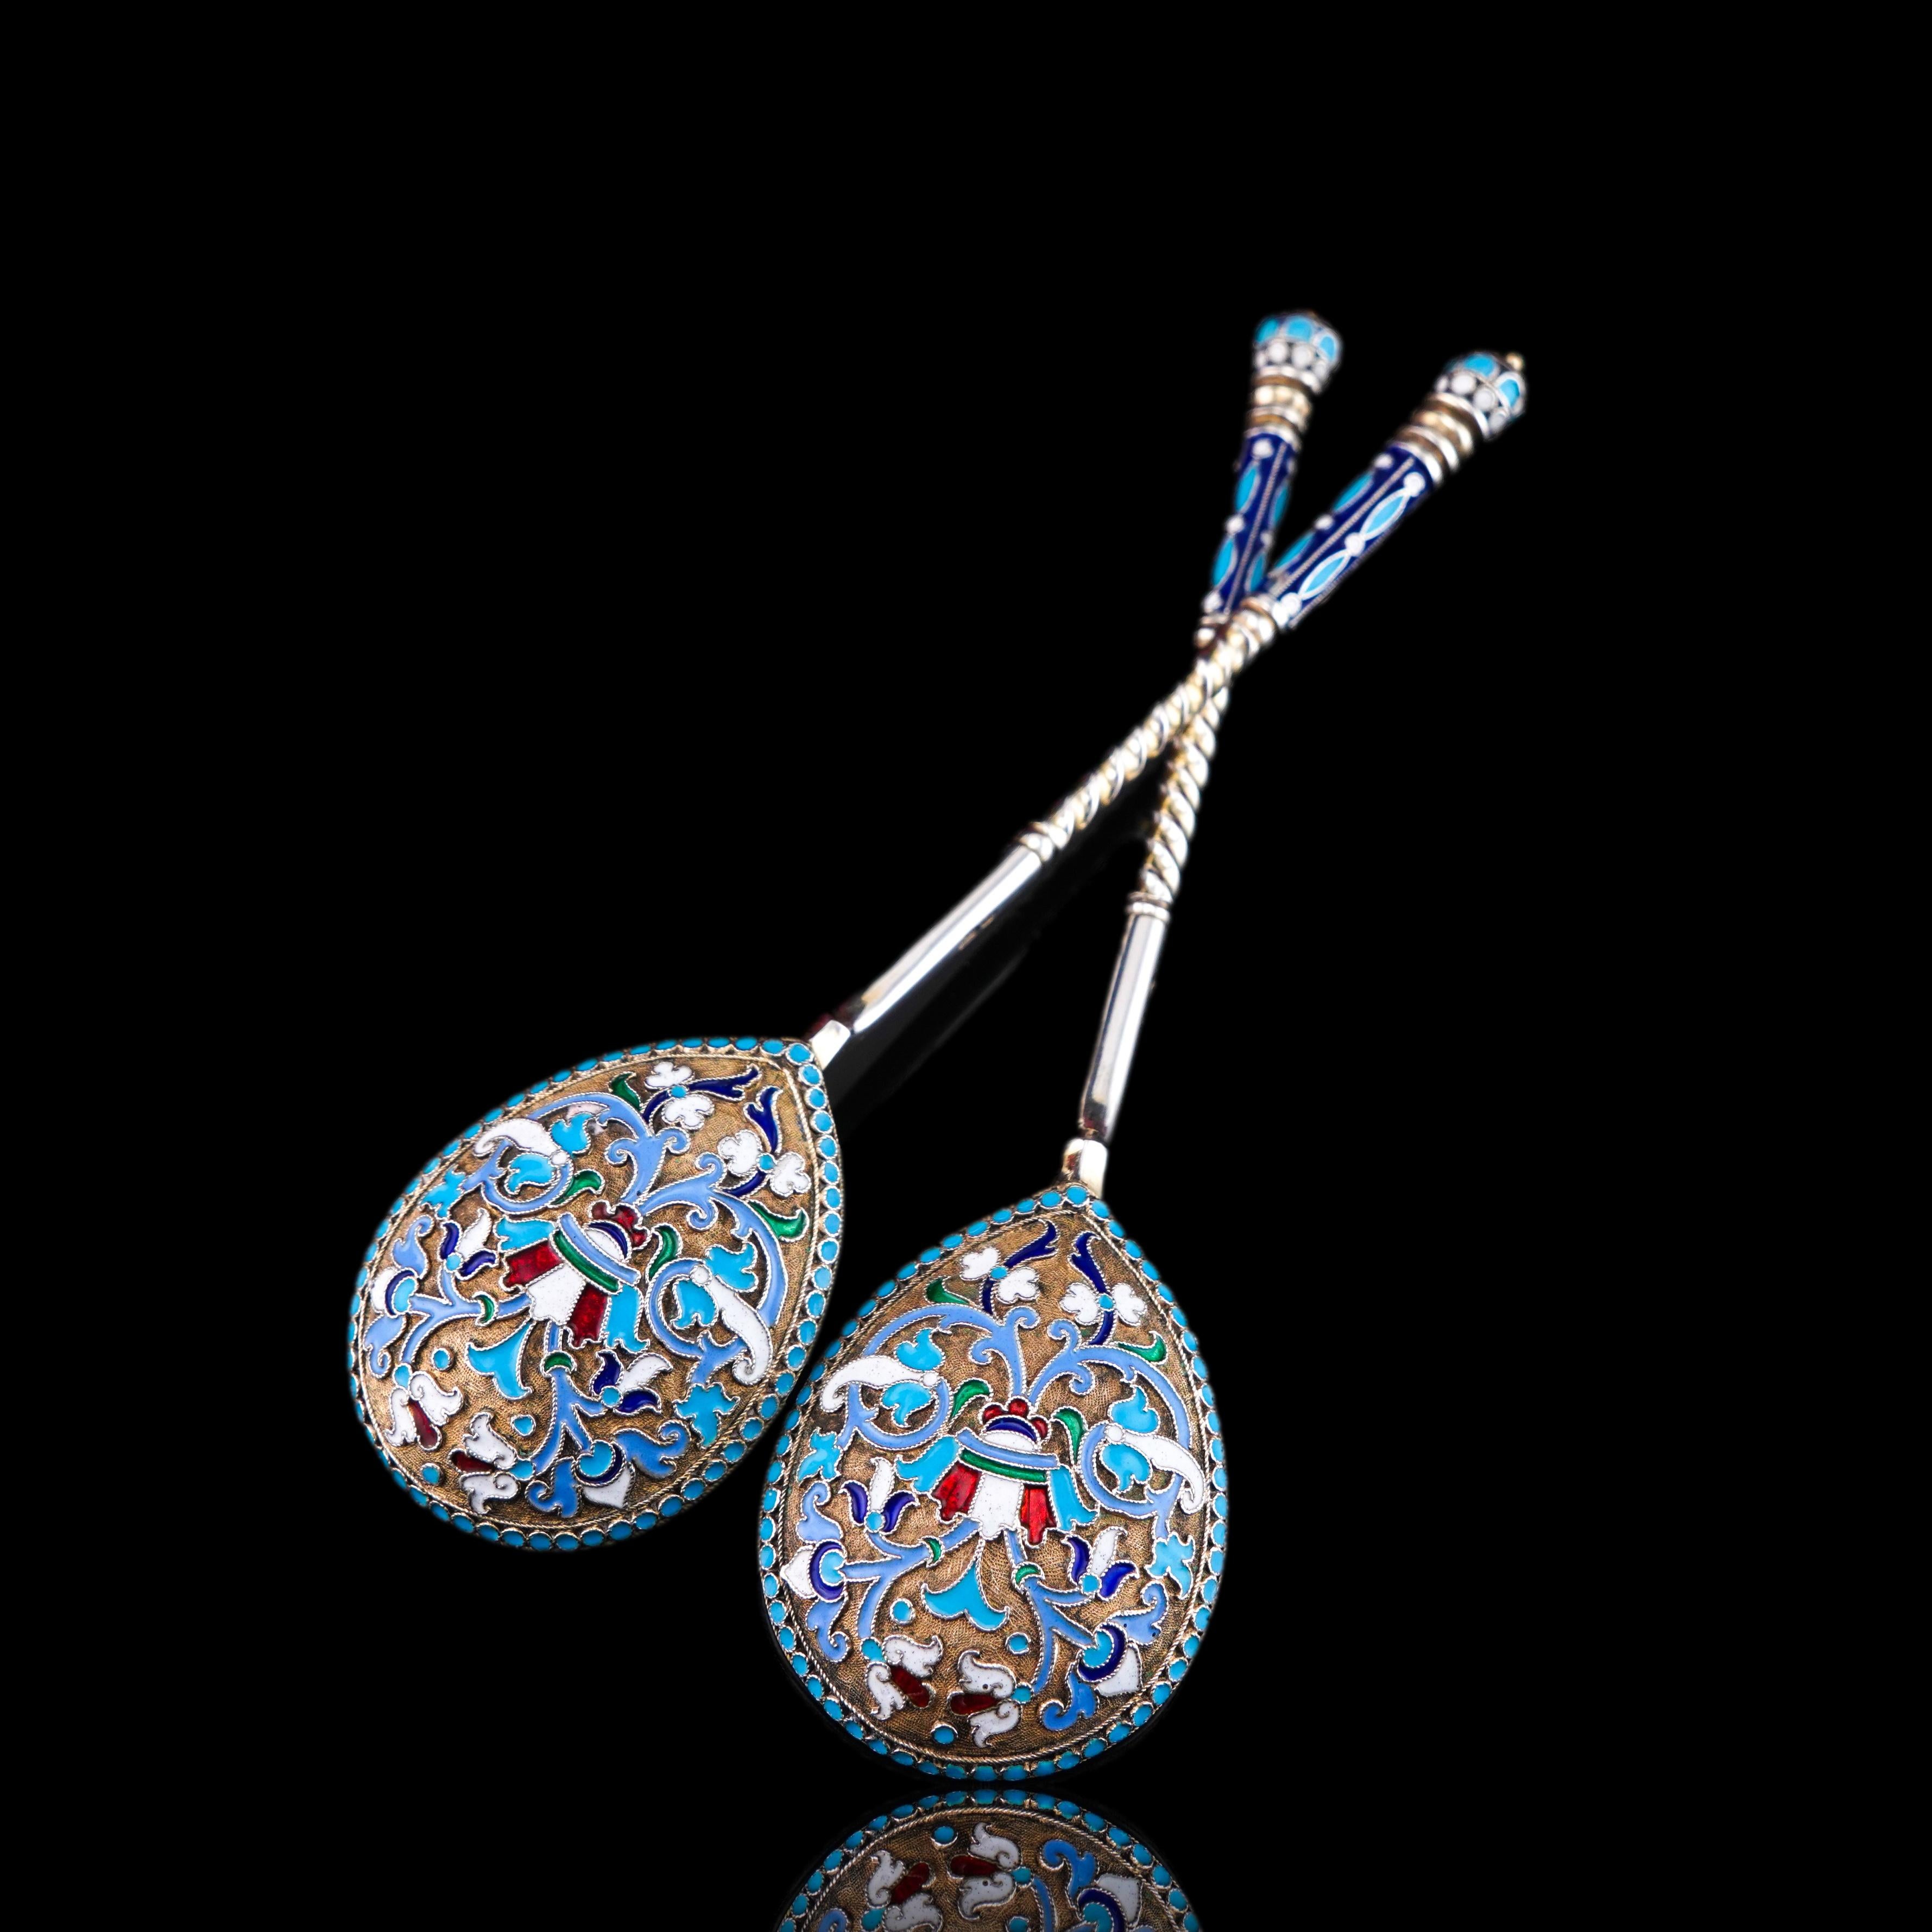 Antique Imperial Russian Solid Silver Spoons with Cloisonne Enamel c.1882 In Good Condition For Sale In London, GB